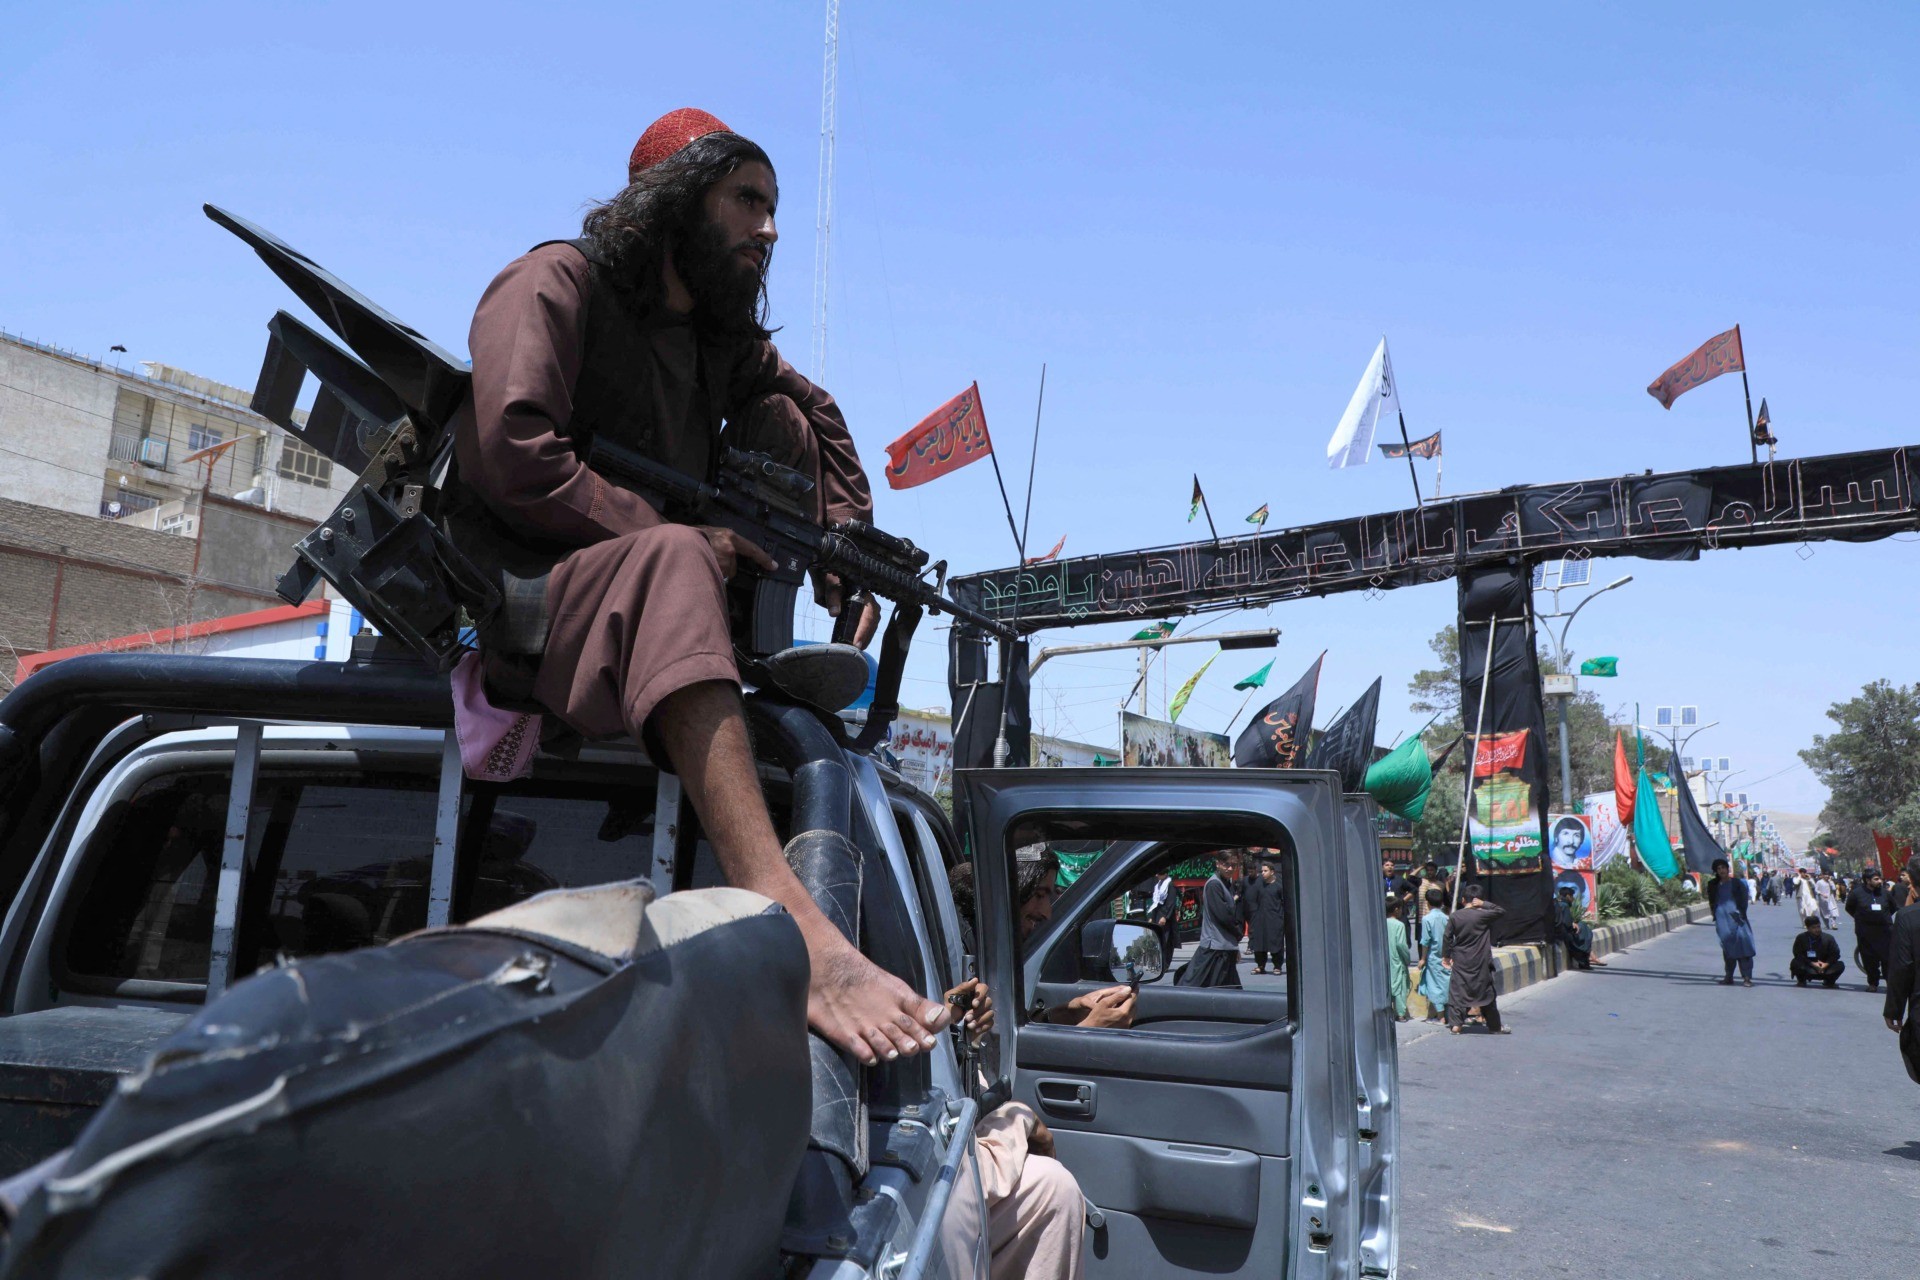 A Taliban fighter stands guard atop a vehicle near the site of an Ashura procession which is held to mark the death of Imam Hussein, the grandson of Prophet Mohammad, along a road in Herat on August 19, 2021, amid the Taliban's military takeover of Afghanistan. (Photo by AREF KARIMI / AFP) (Photo by AREF KARIMI/AFP via Getty Images)